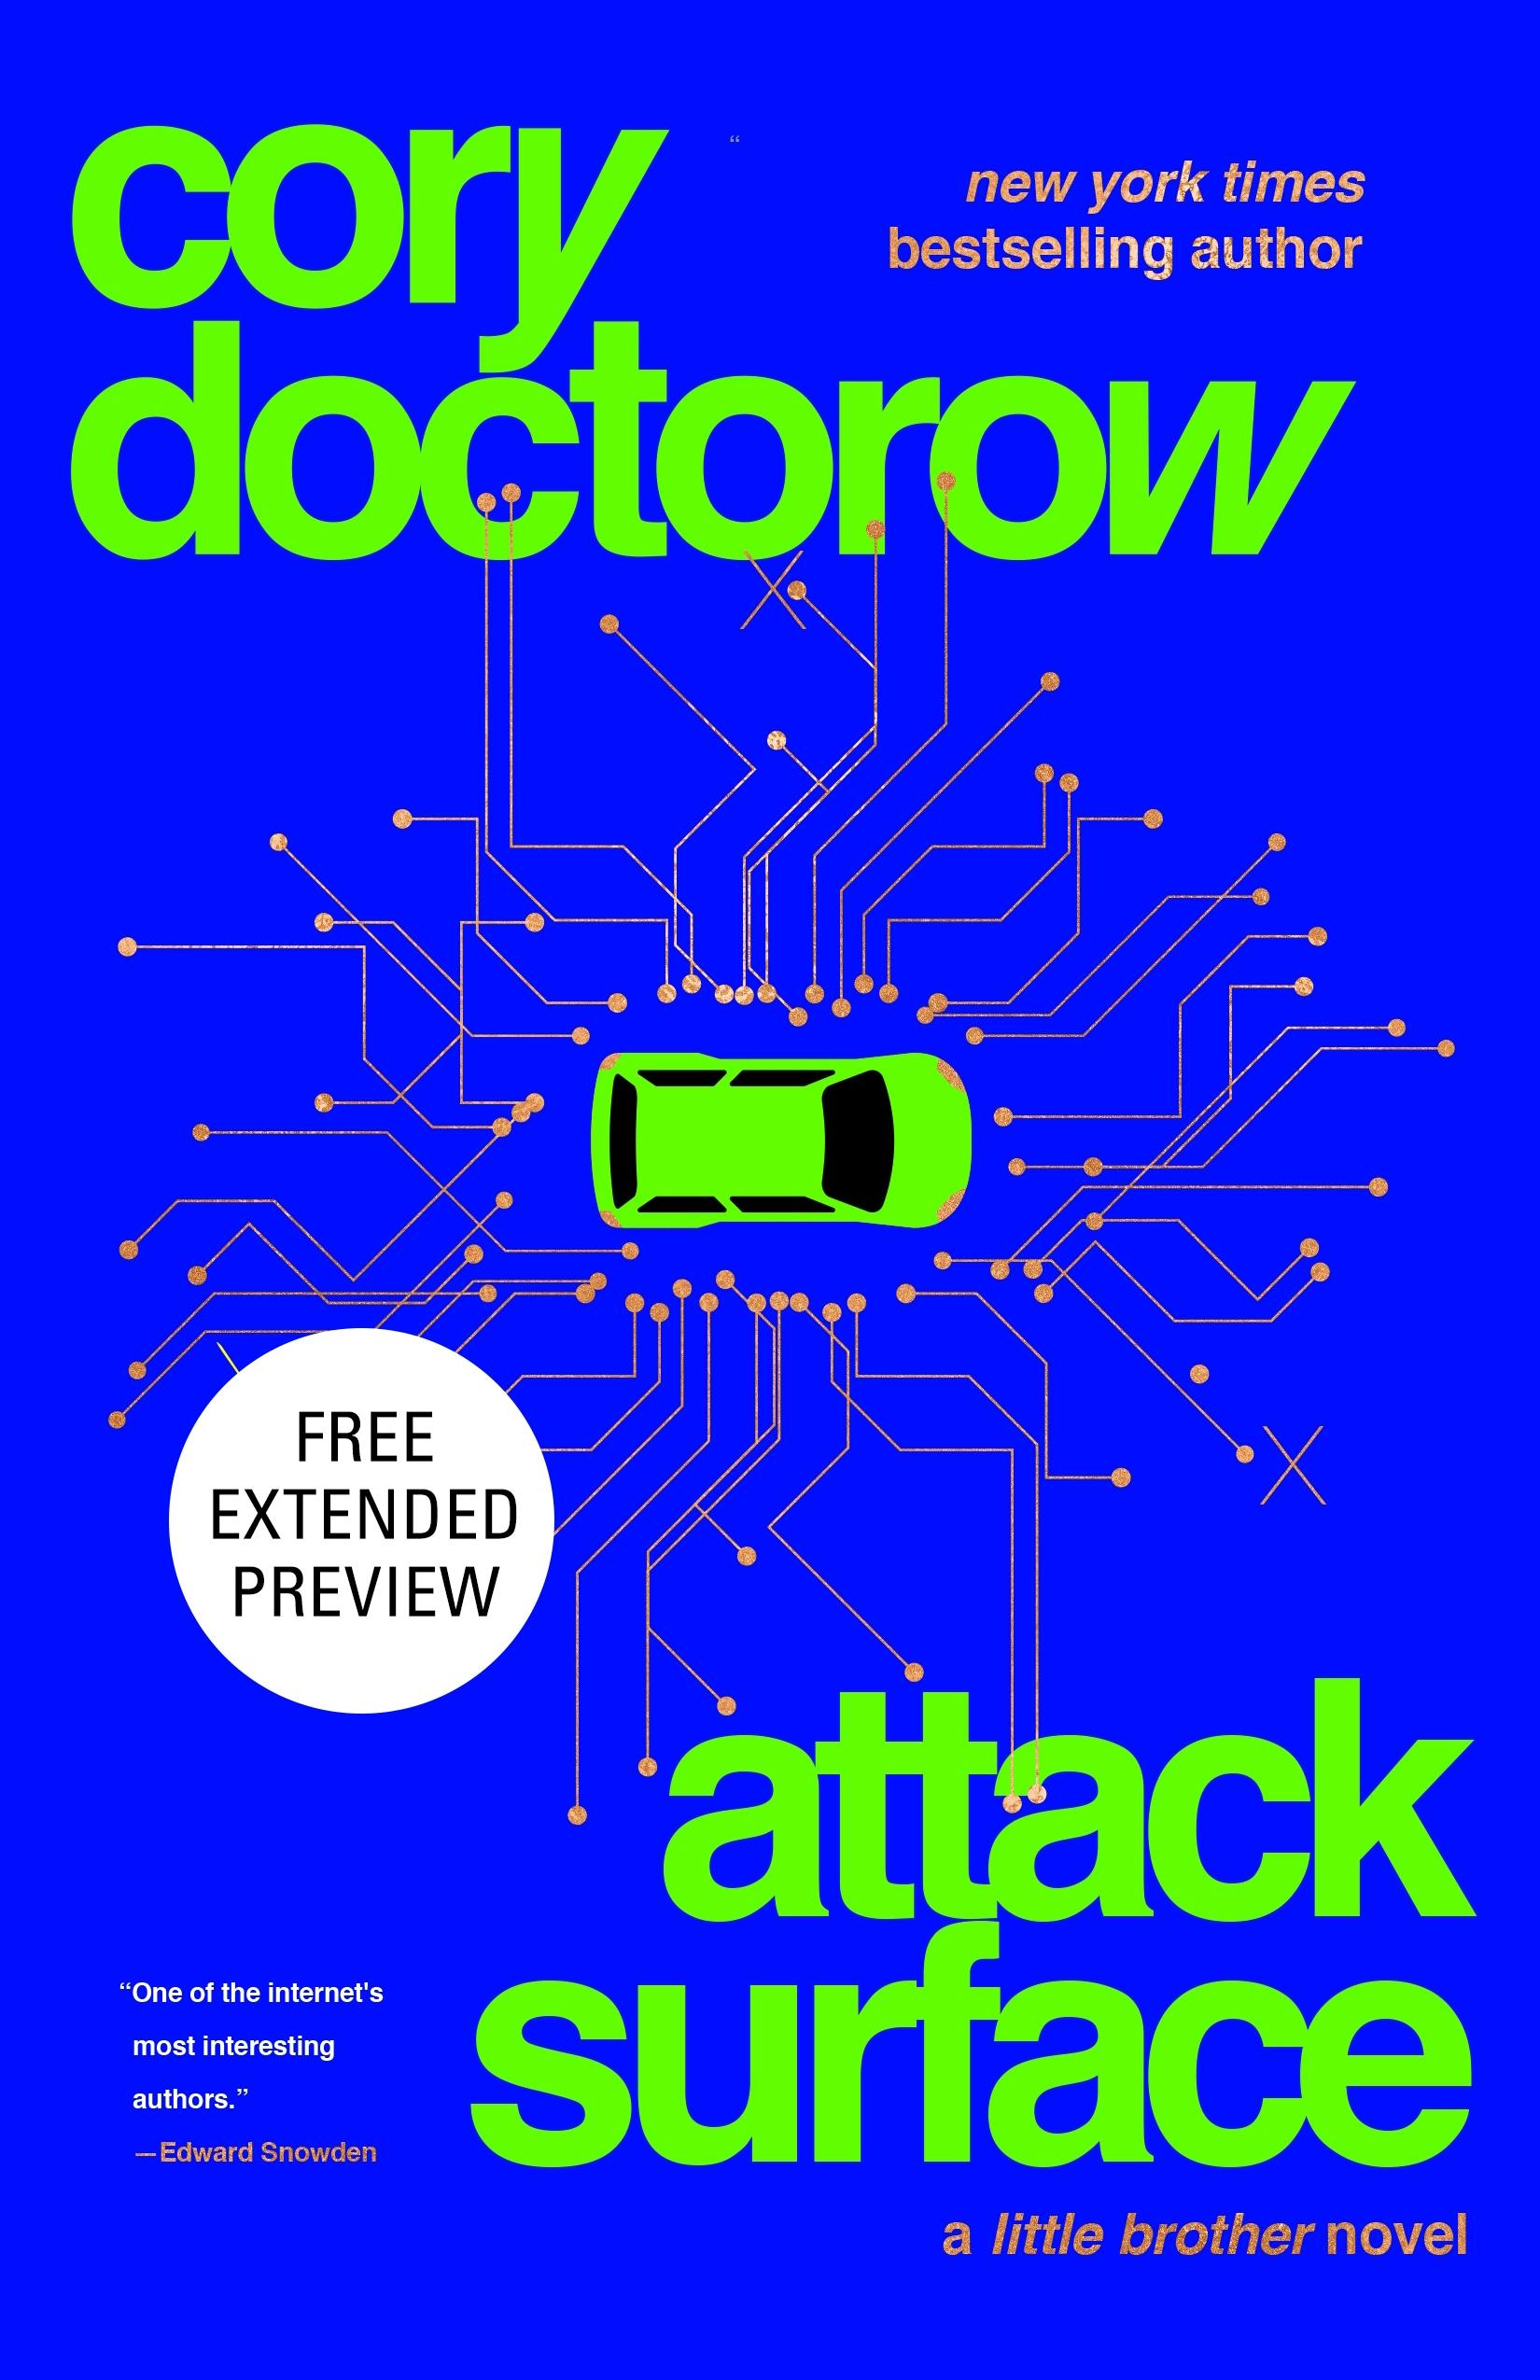 Cover for the book titled as: Attack Surface Sneak Peek